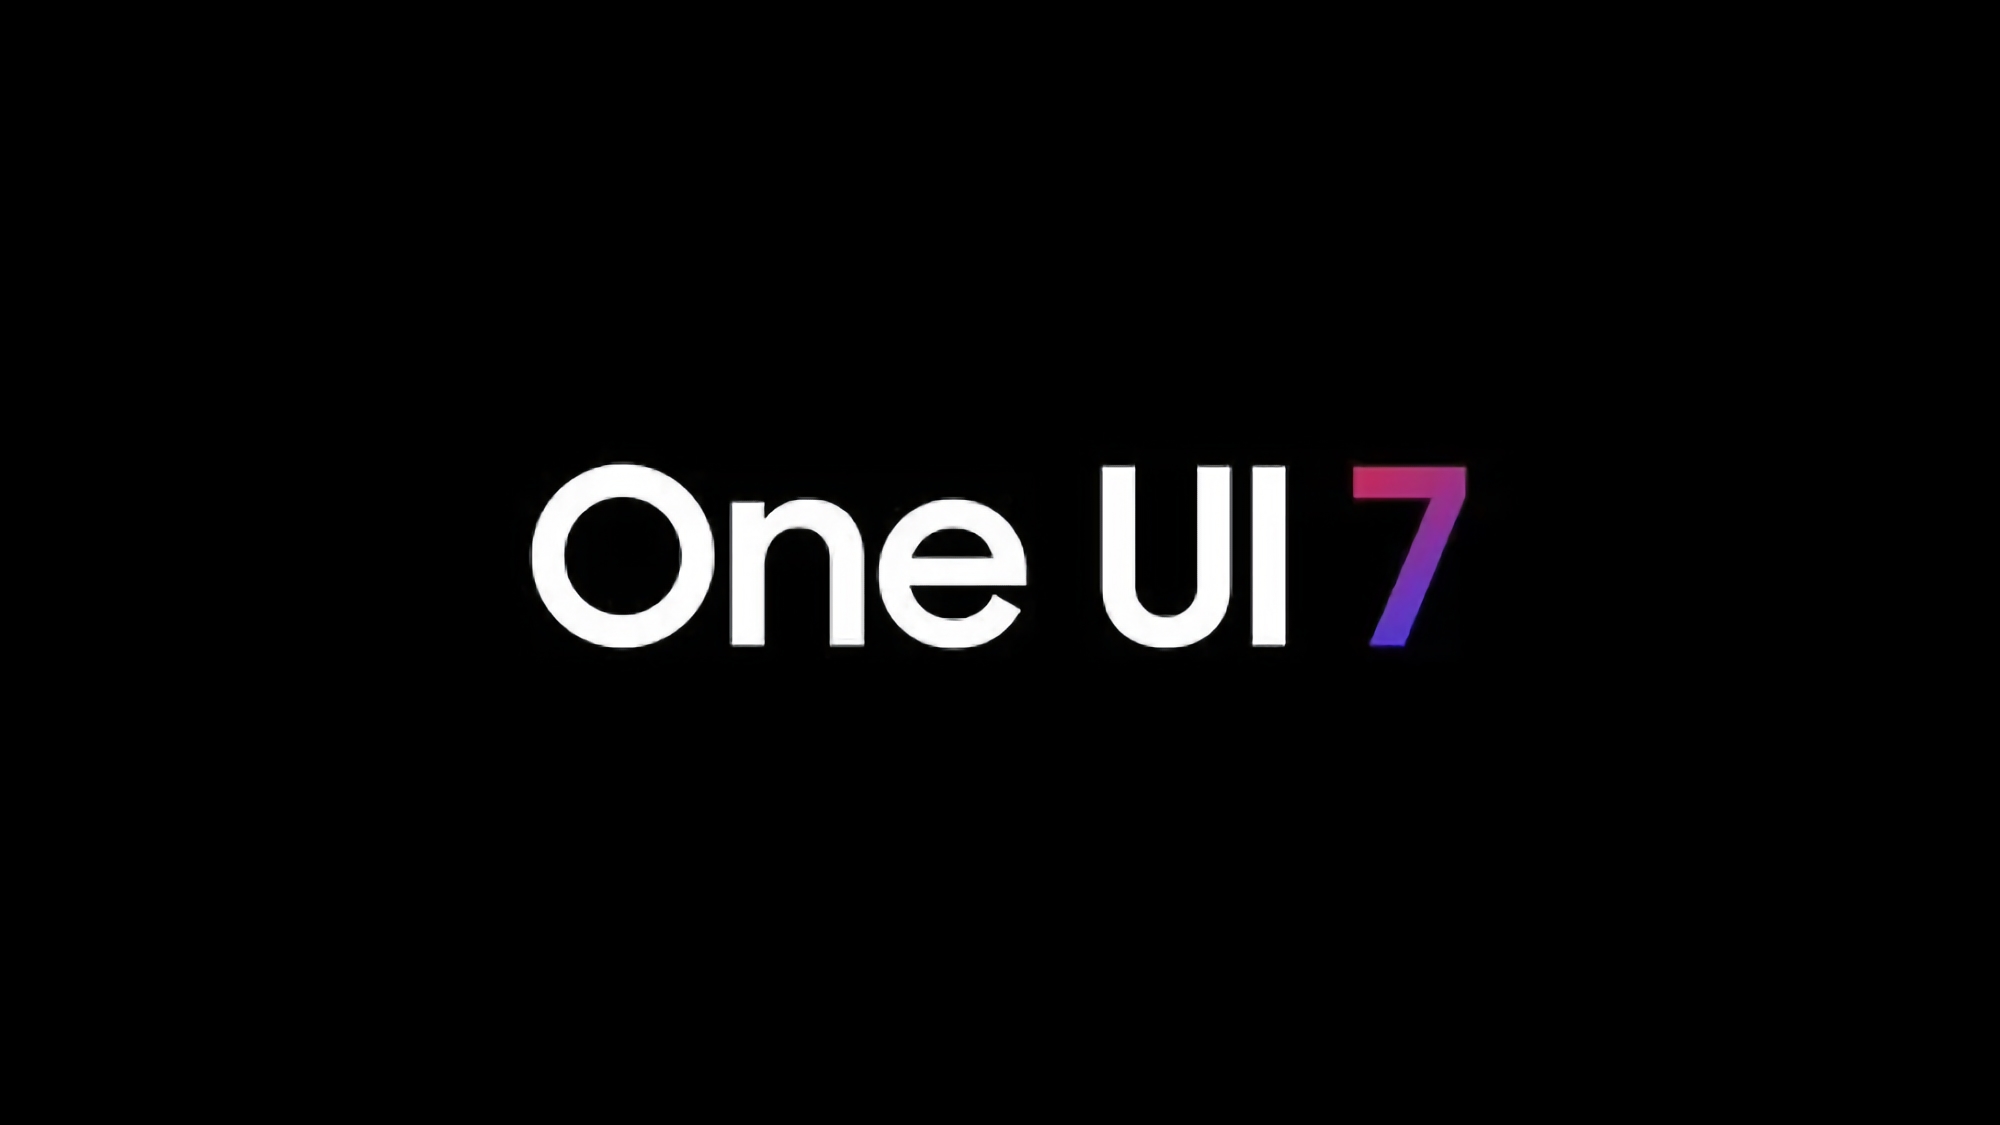 Insider: Samsung will release the One UI 7 Beta on Monday 29 July